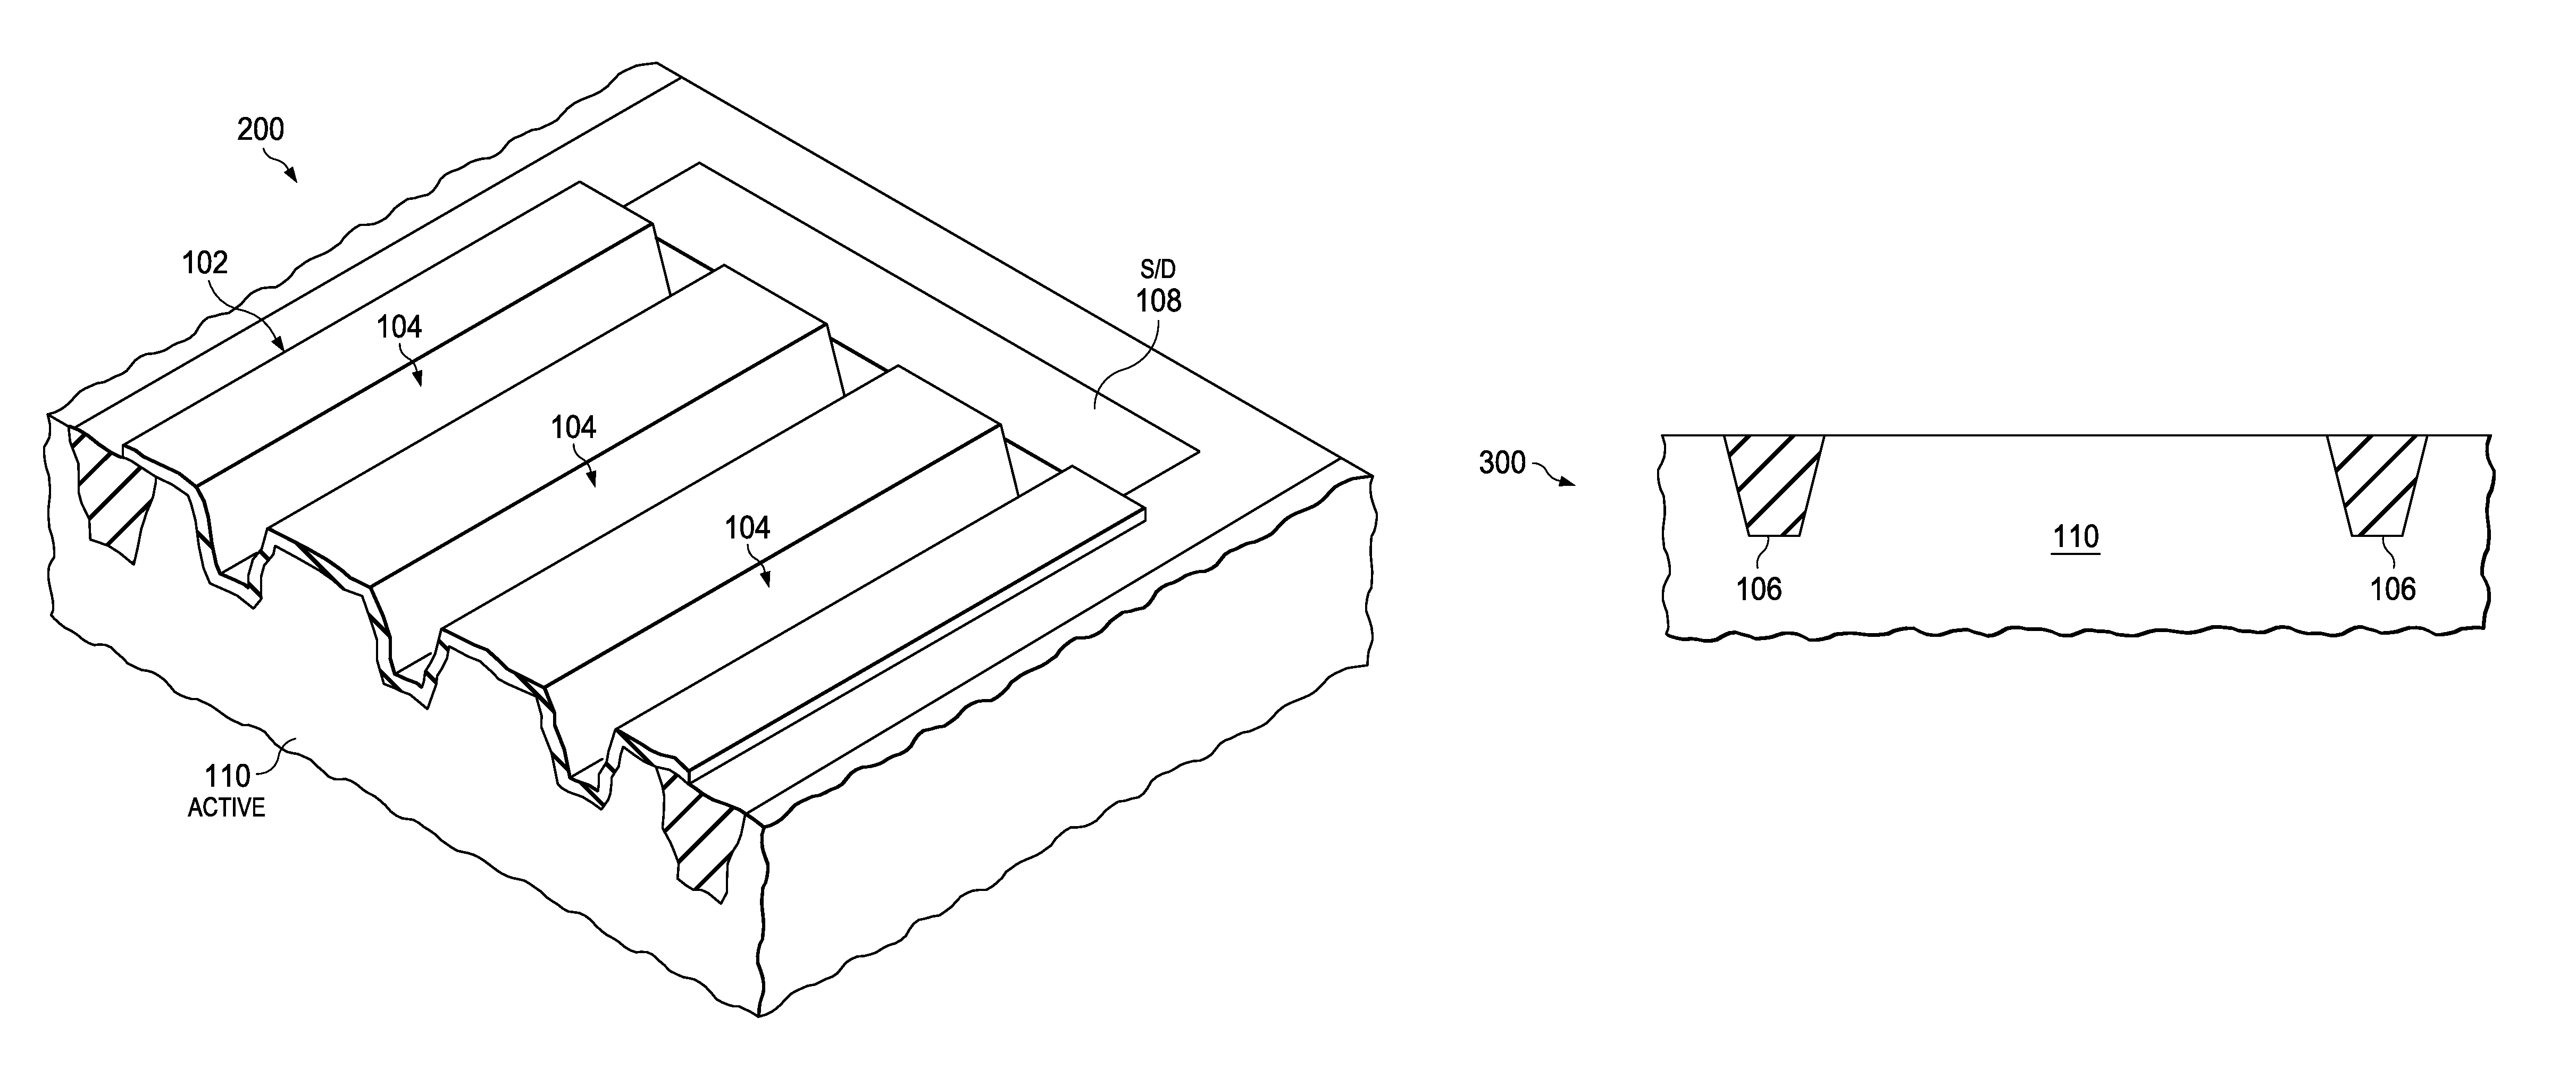 Transistors with recessed active trenches for increased effective gate width